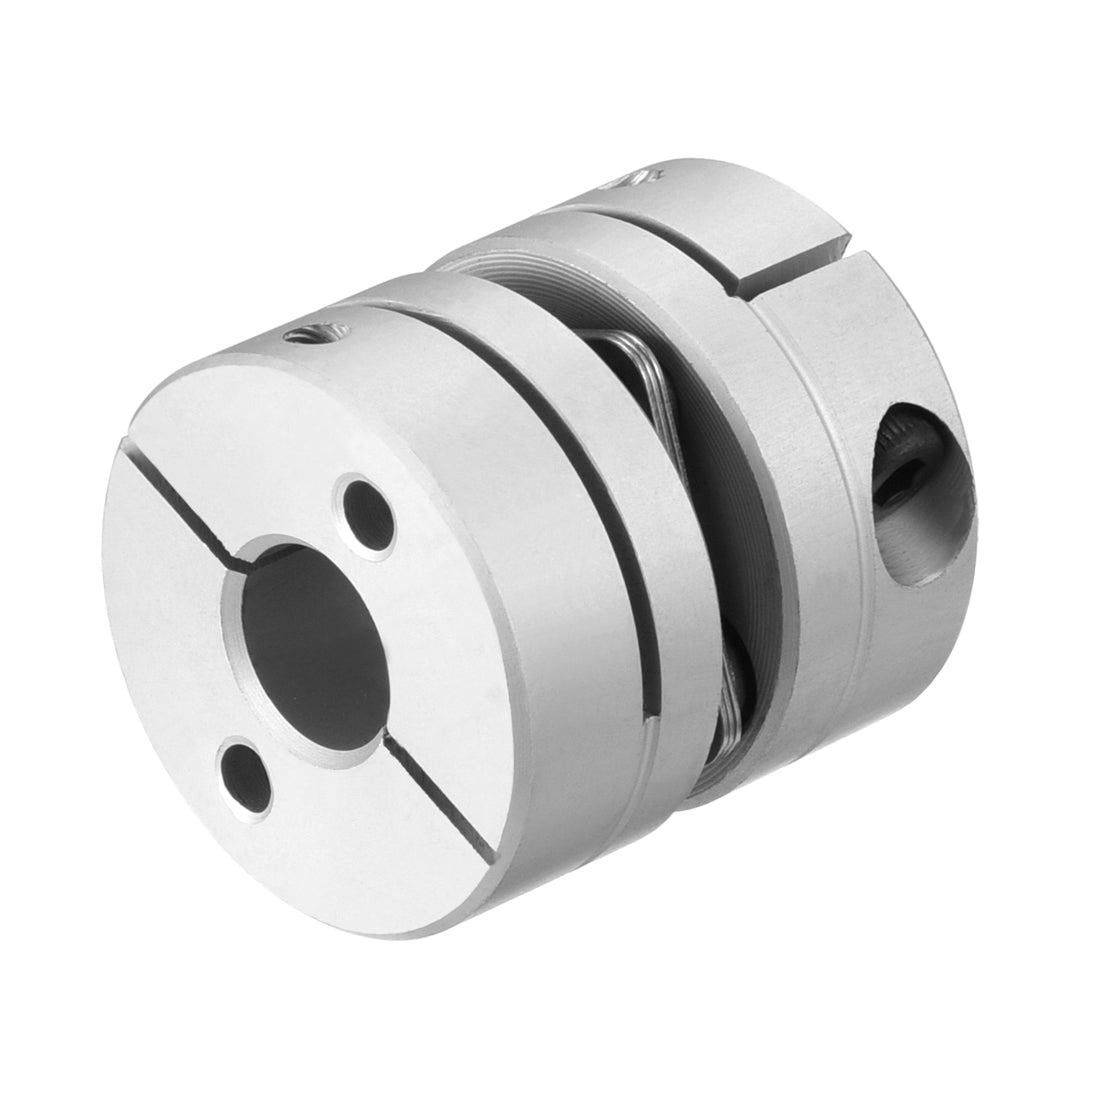 uxcell Uxcell 8mm to 8mm Bore L26xD26 1 Diaphragm Motor Wheel Flexible Coupling Joint